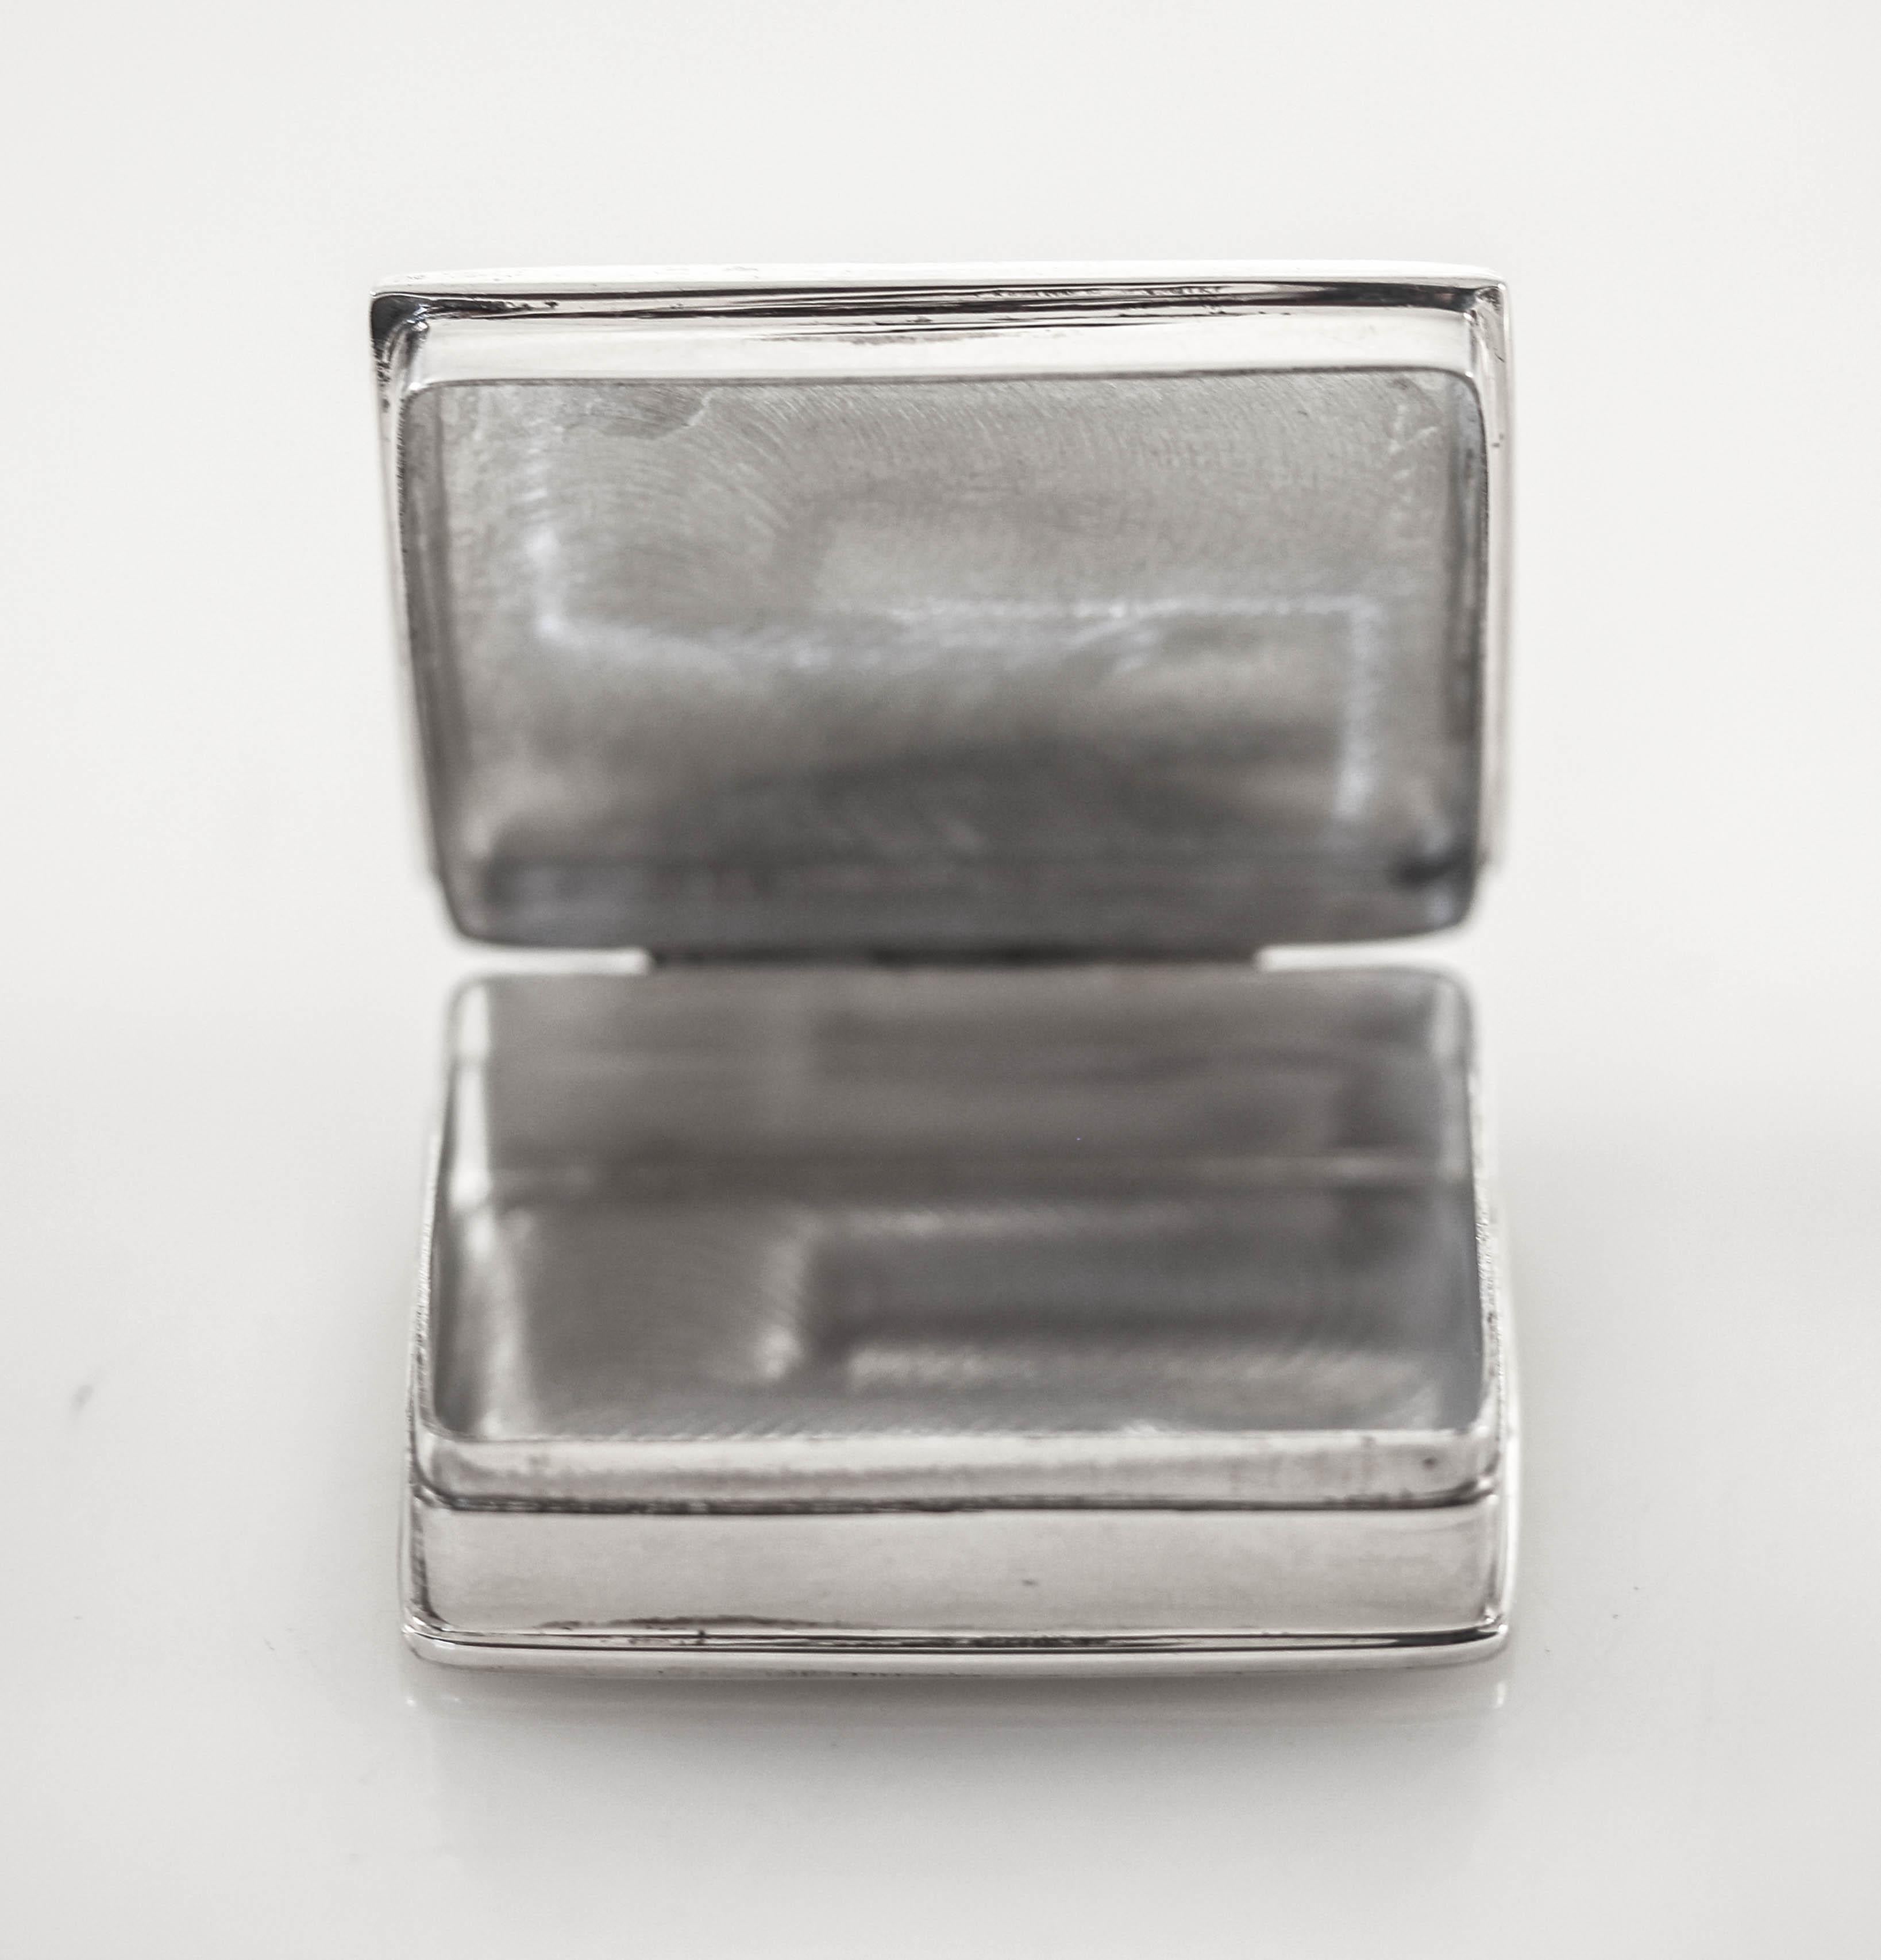 We are delighted to offer this sterling silver English pillbox. The lid is made of sterling and has an enamel cameo design. Two hounds are seen next to each other. In the background hills and an outdoor sporting event. The perfect gift for that